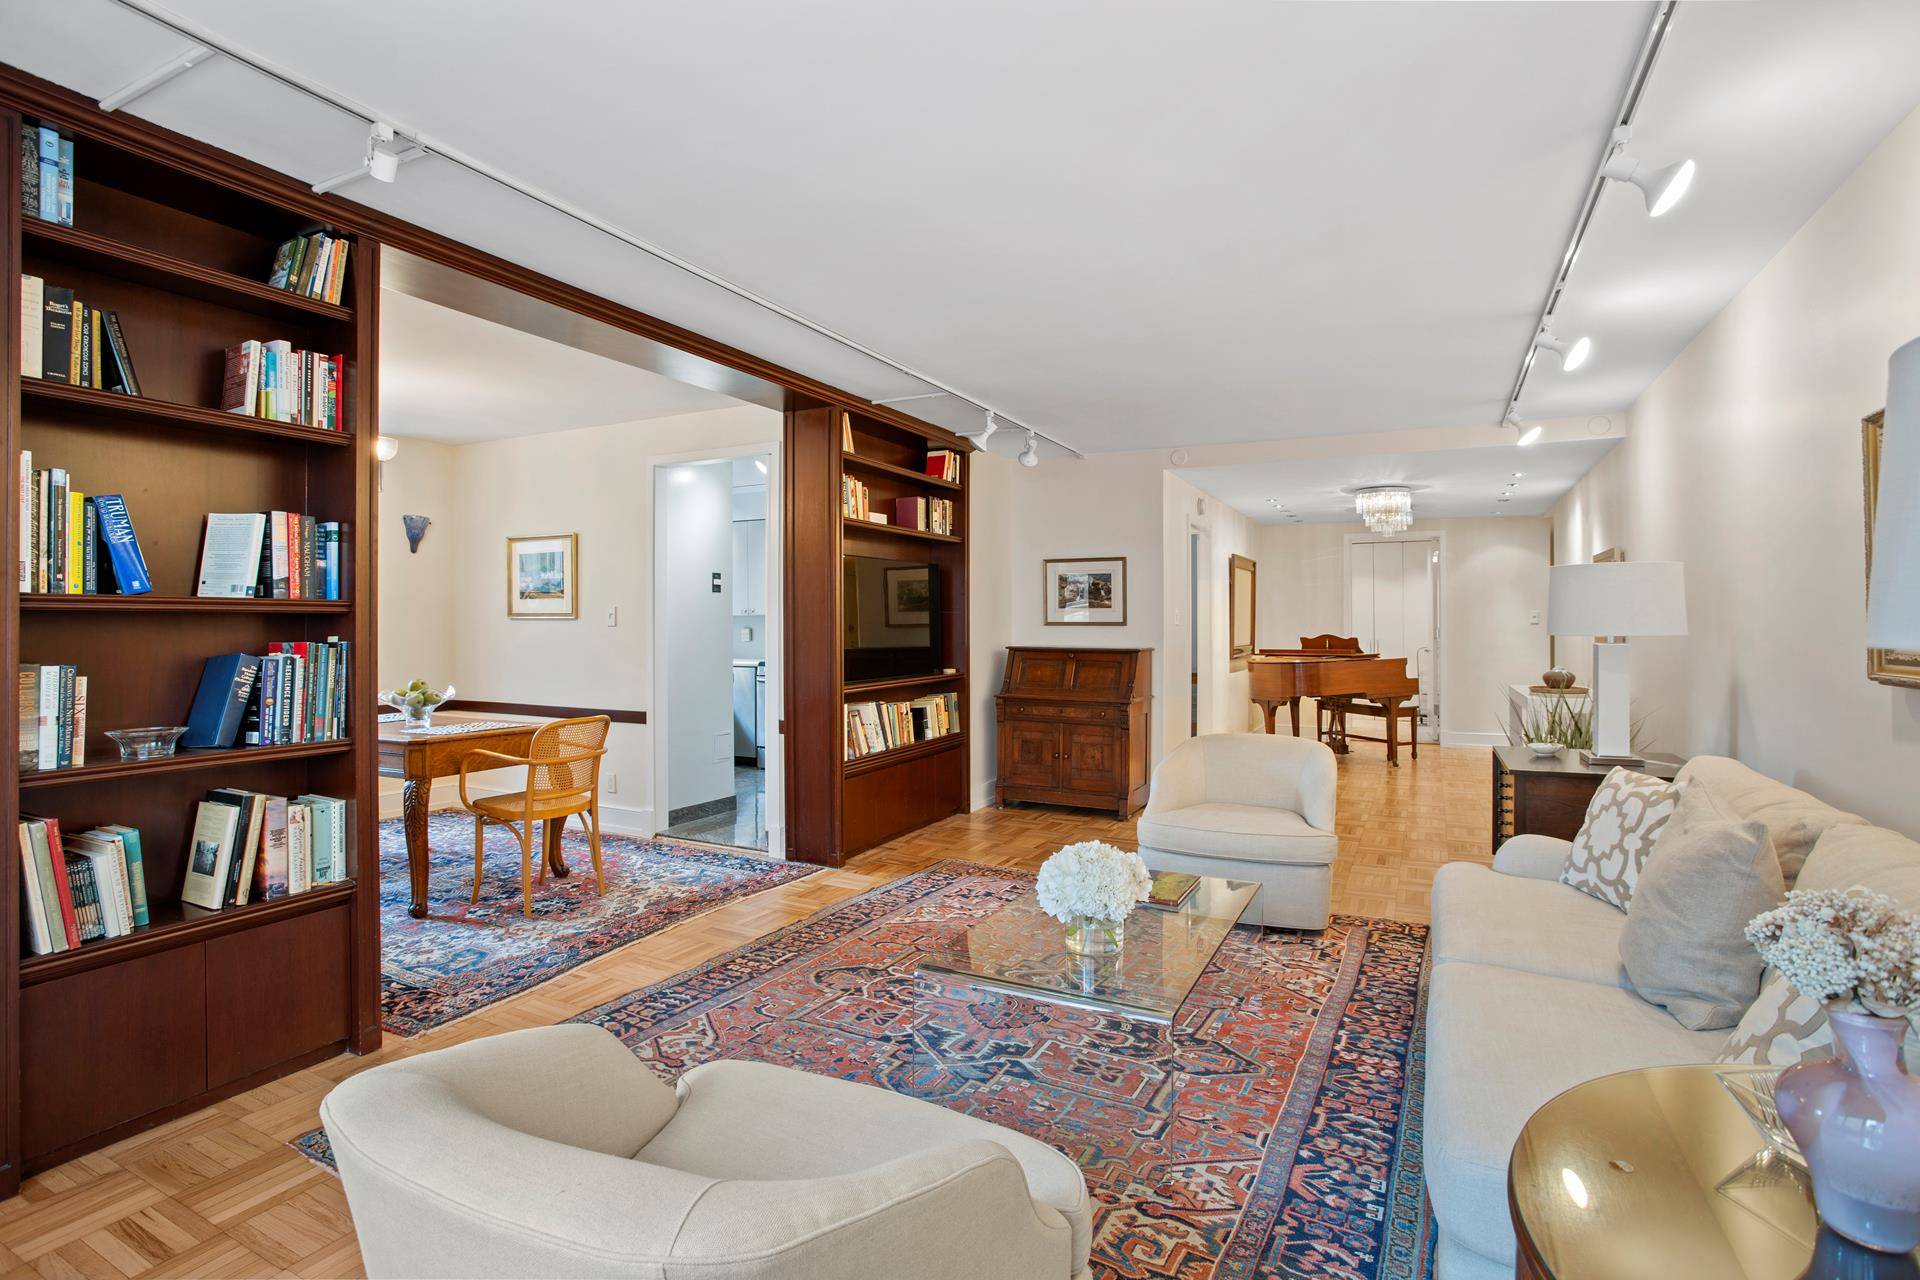 Perfect opportunity to purchase a sprawling, two bedroom, two bath home in 360 East 72nd Street one of the most prestigious and sought after coops on the Upper East Side.